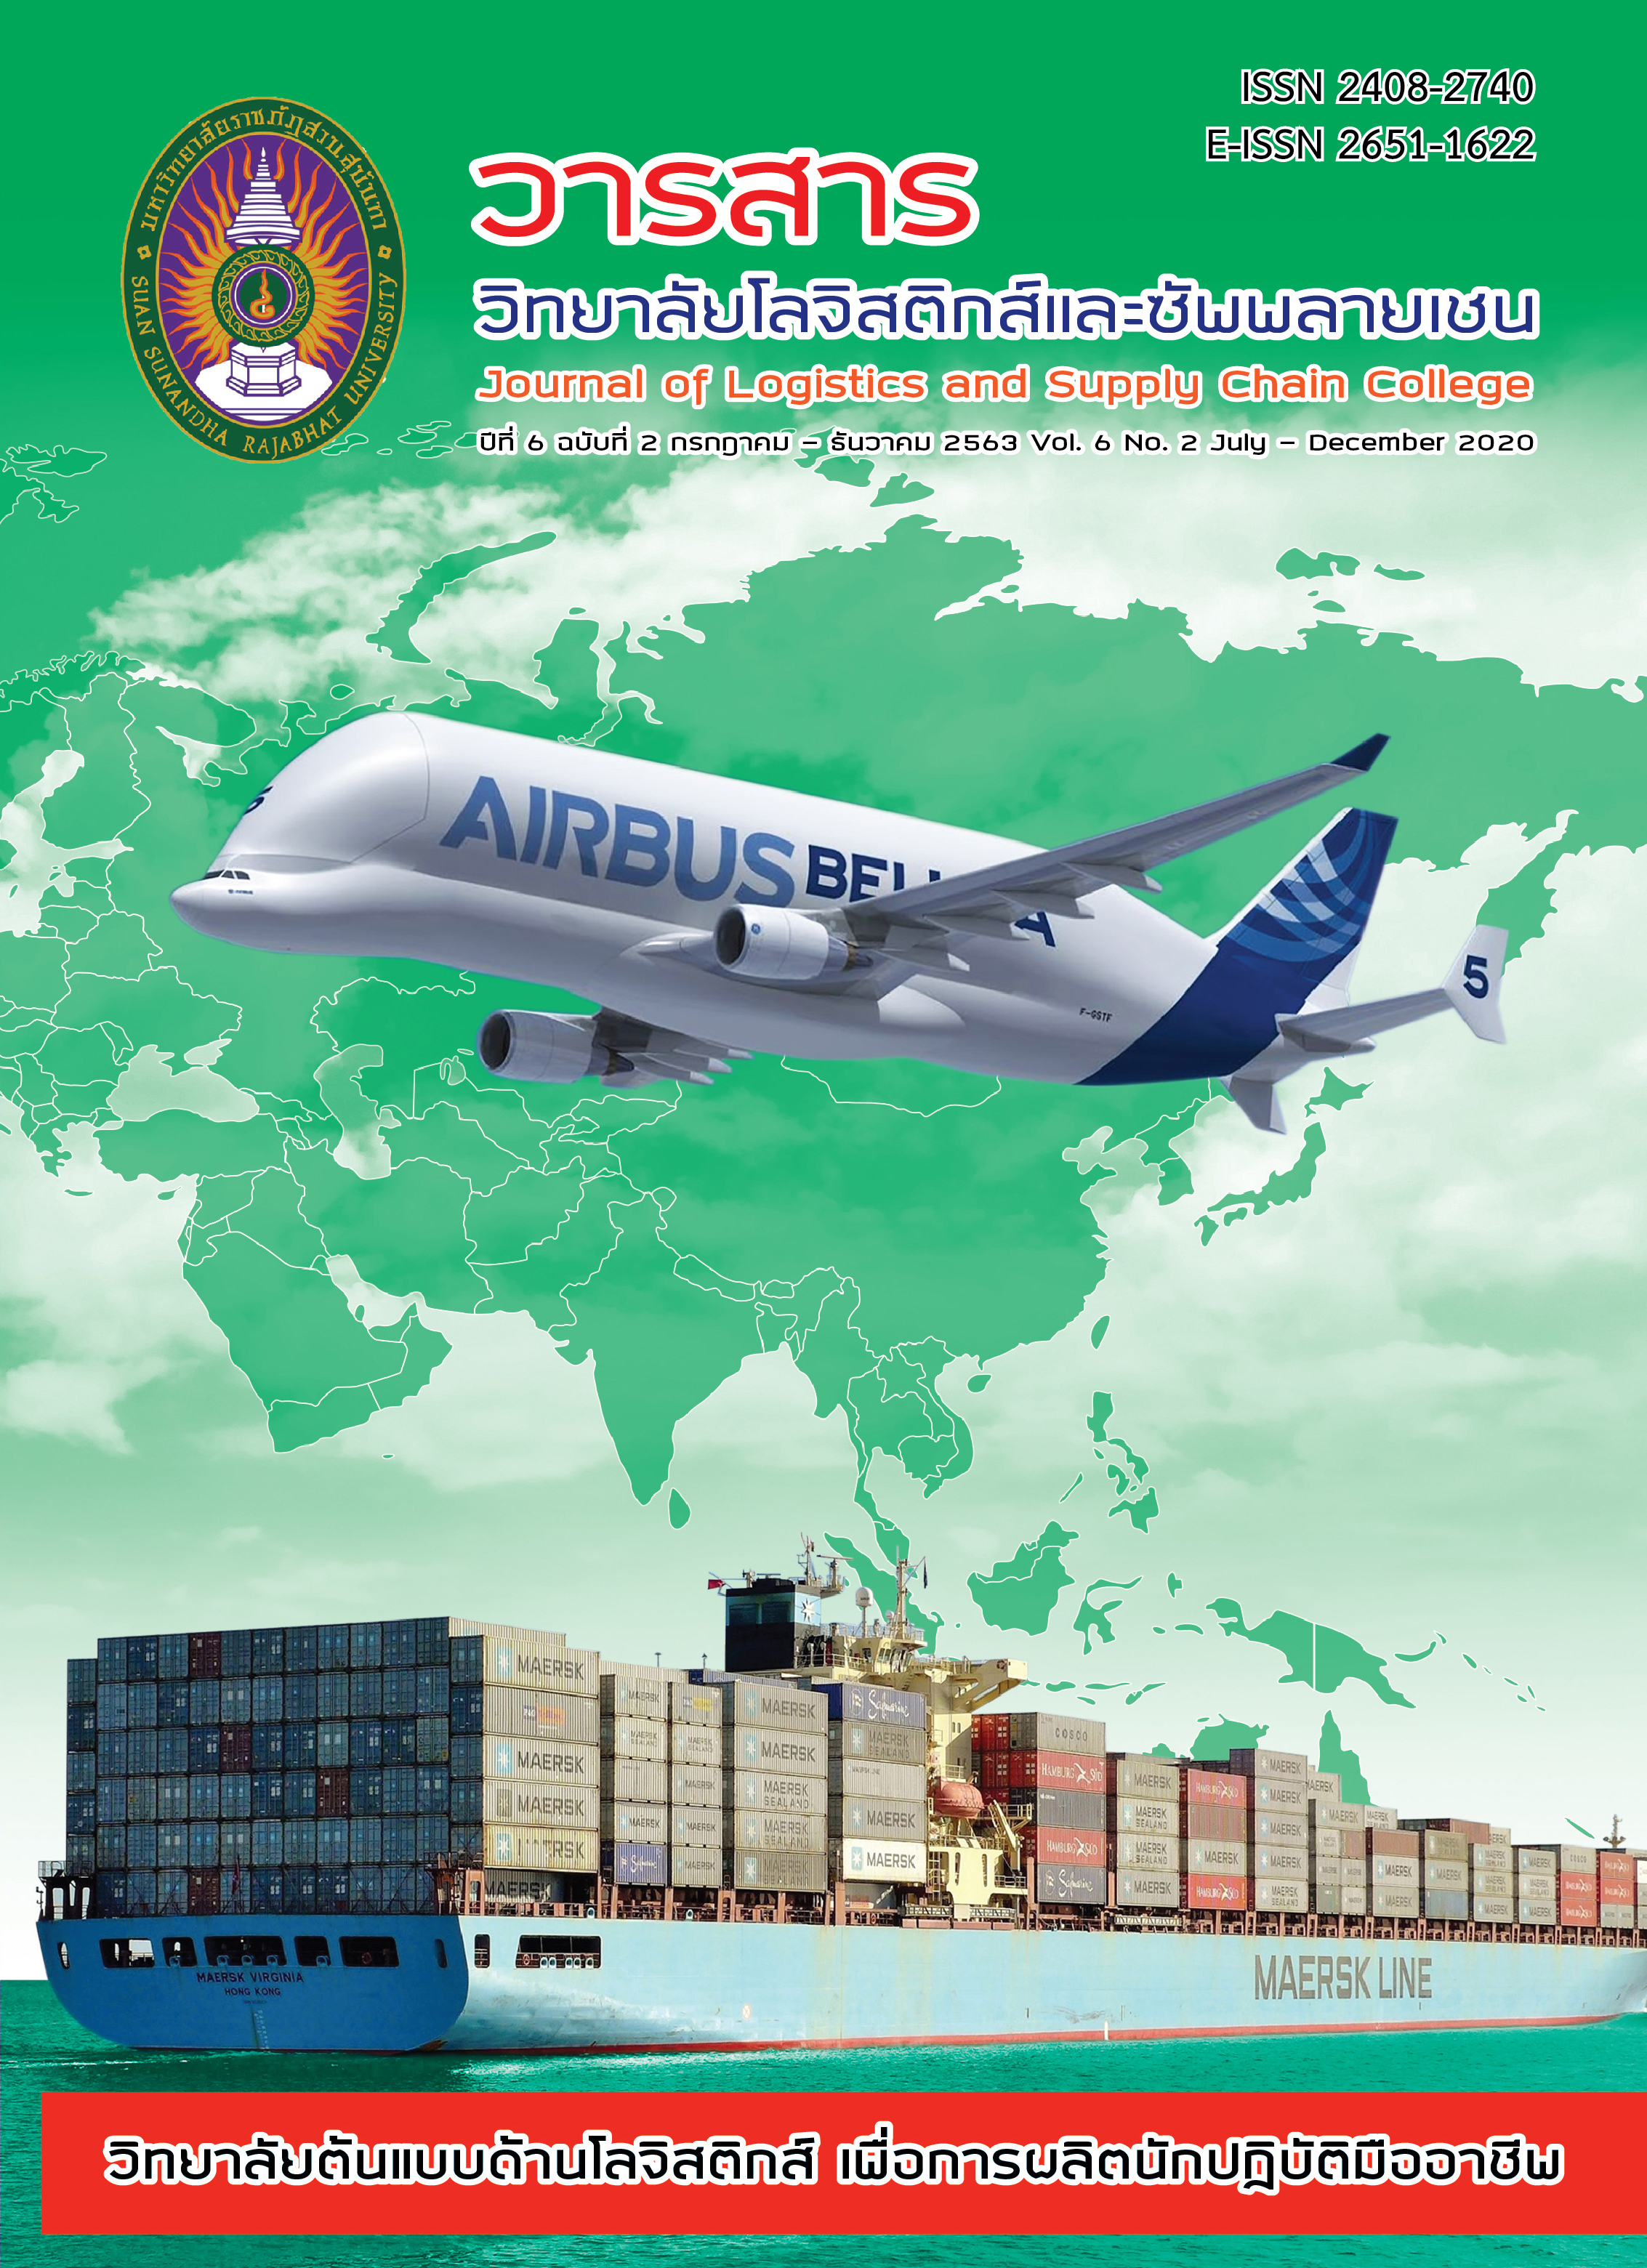 					View Vol. 6 No. 2 กรกฎาคม-ธันวาคม (2020): Journal of Logistics and Supply Chain College
				